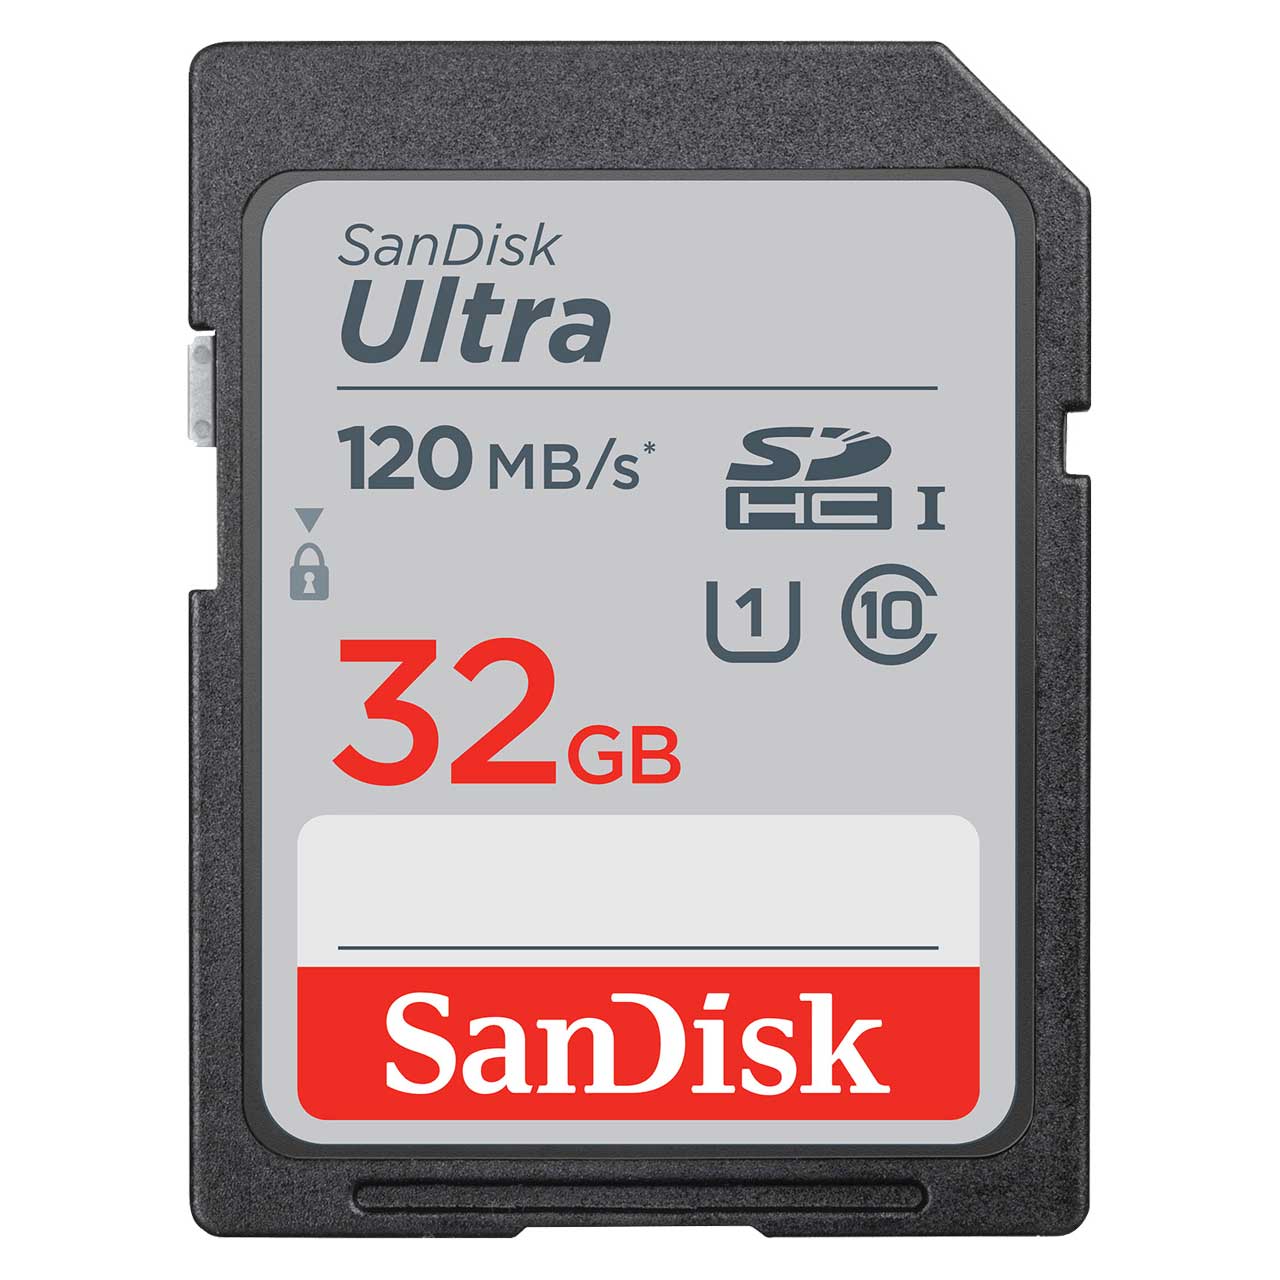 SanDisk SDSDUN4-032G-AN6IN Ultra SD Class 10 Memory Card - Compatible with SDHC / SDXC and SDHC-I / SDXC-I - 32 GB SDSDUN4032GAN6IN